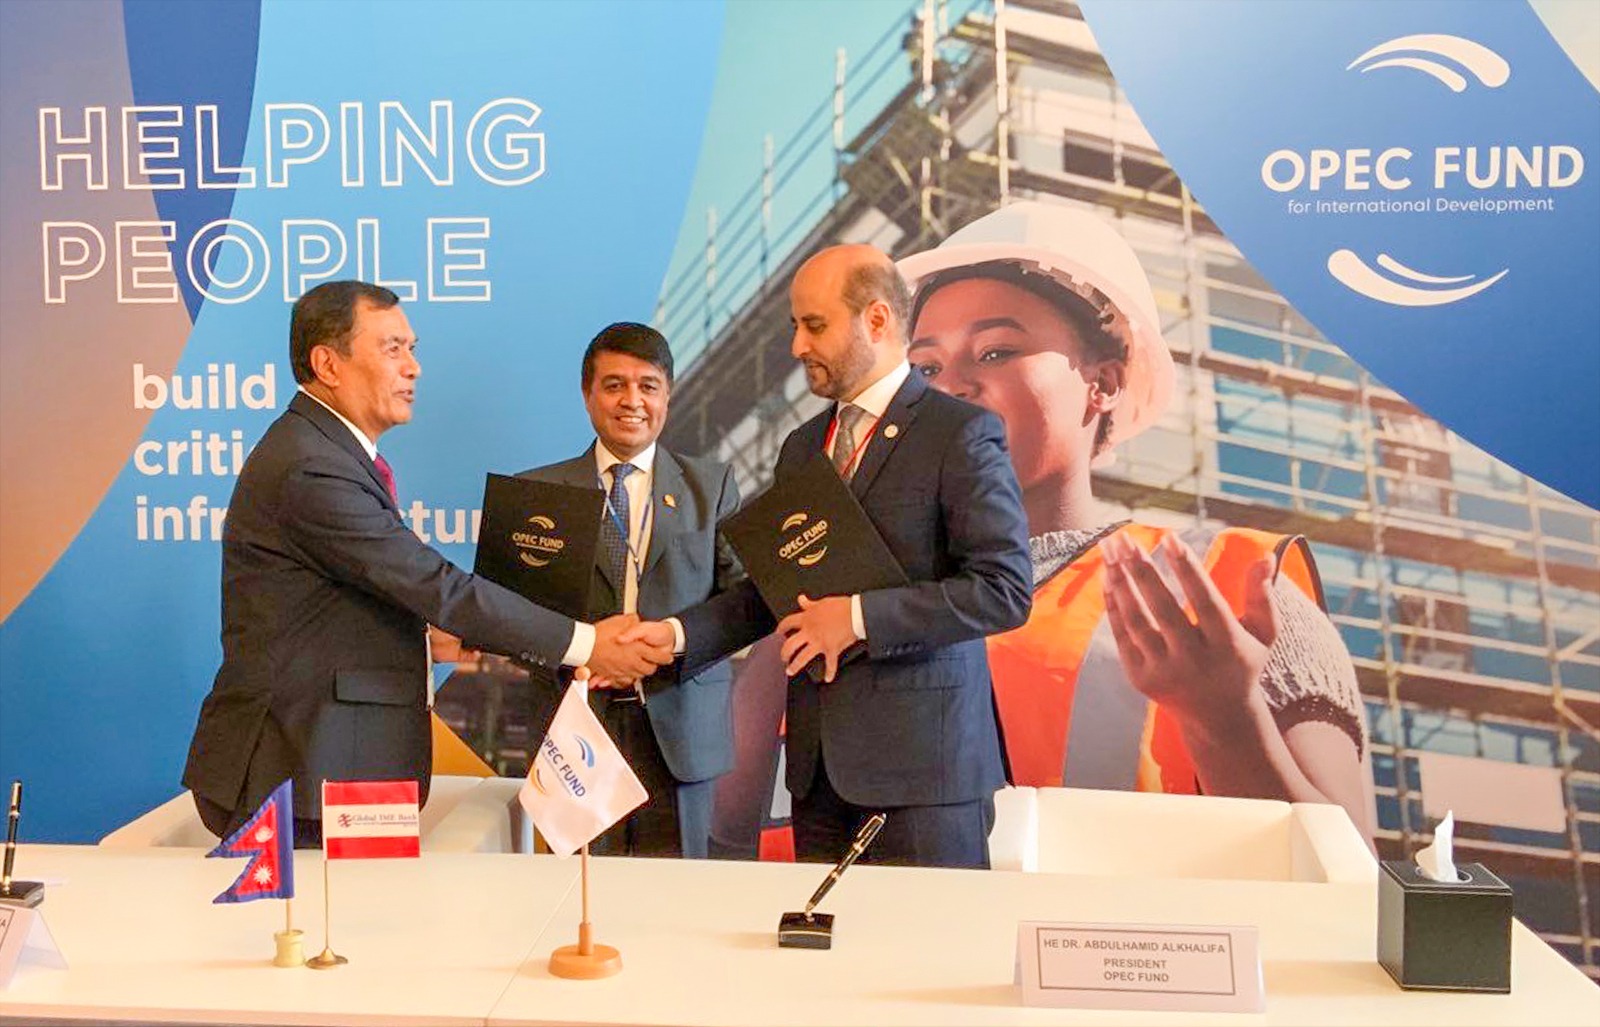 OPEC Fund provides $25 million loan to GIBL to support small businesses & enhance climate resilience in Nepal